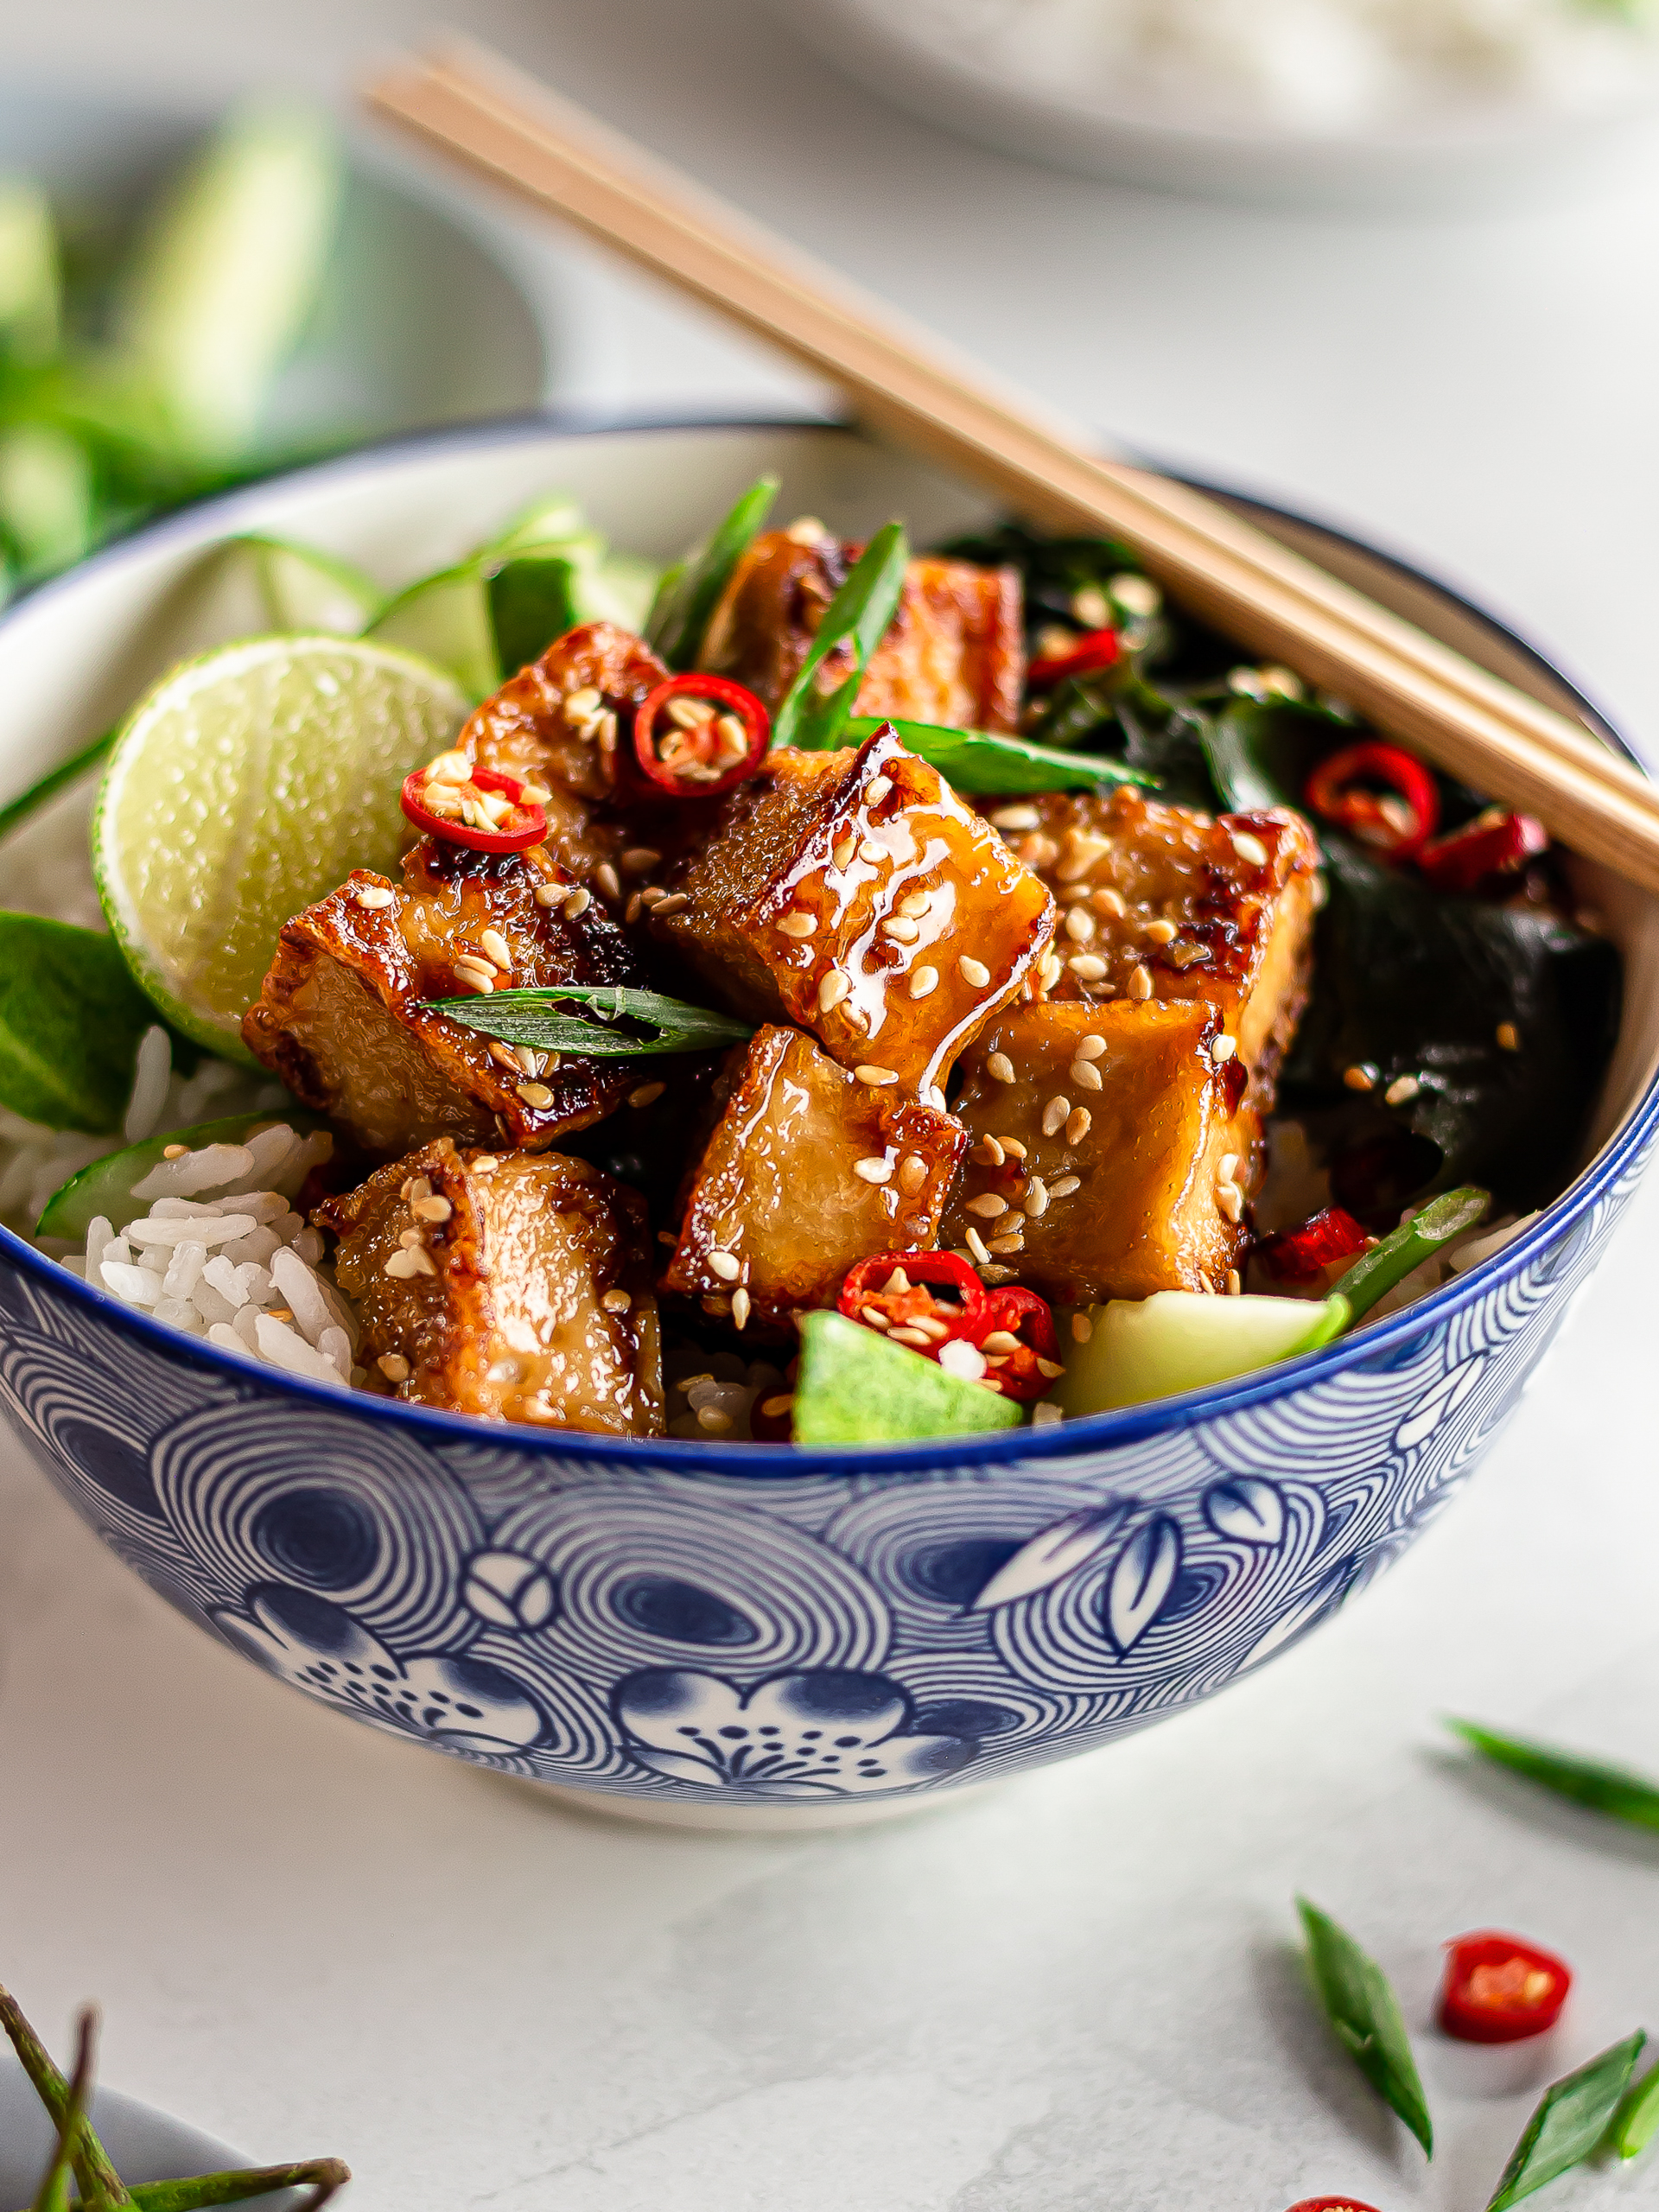 10 Healthy Asian Recipes To Spice Up Your Dinner